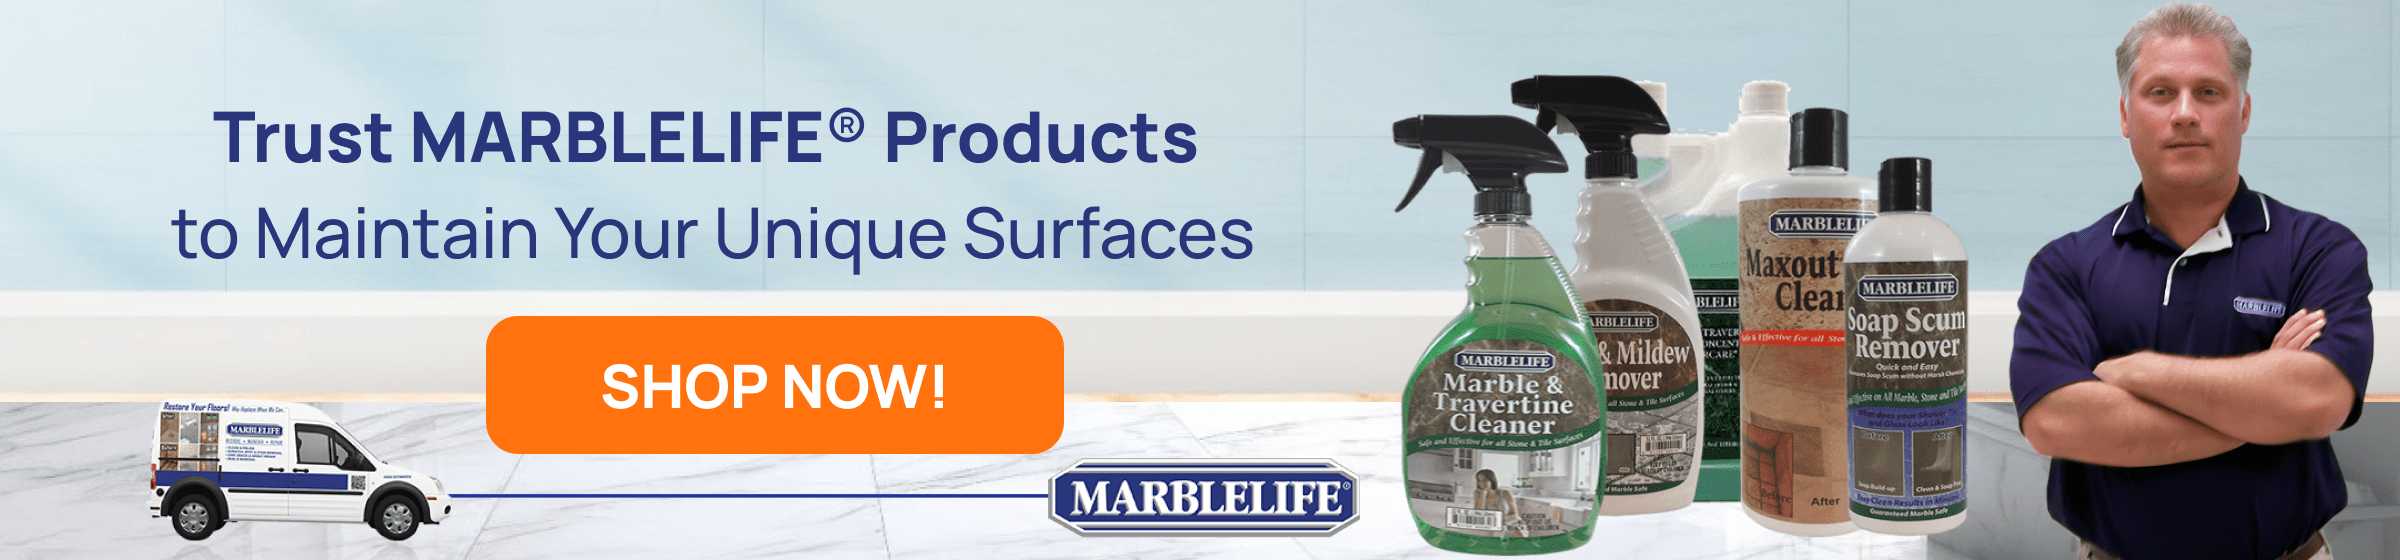 MARBLELIFE Products Shop Now